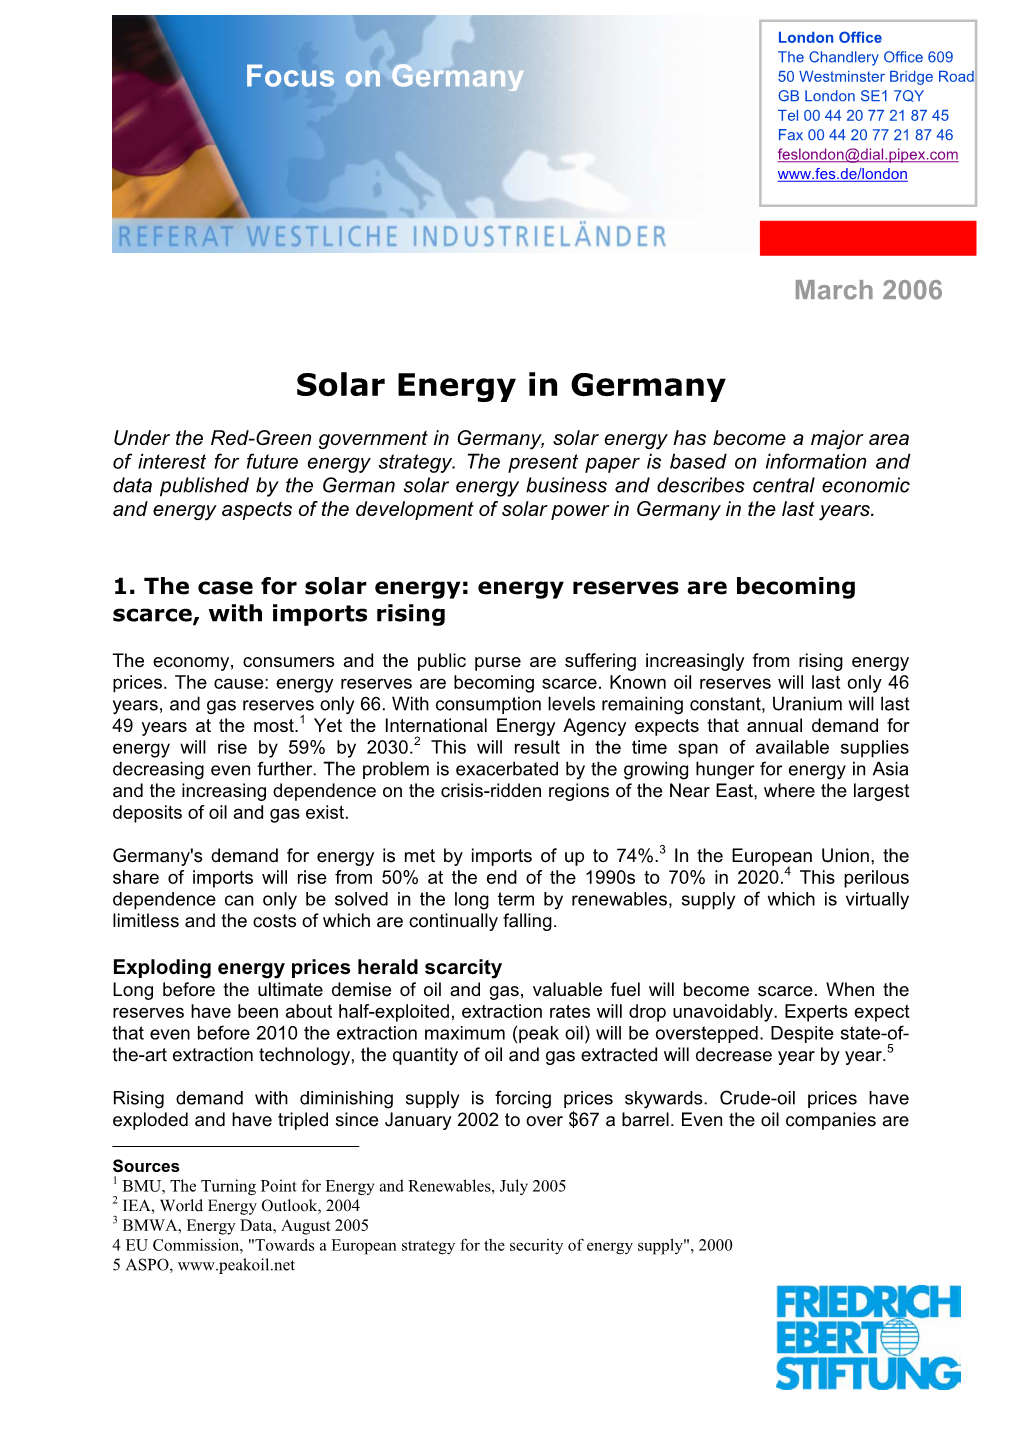 Focus on Germany Solar Energy in Germany